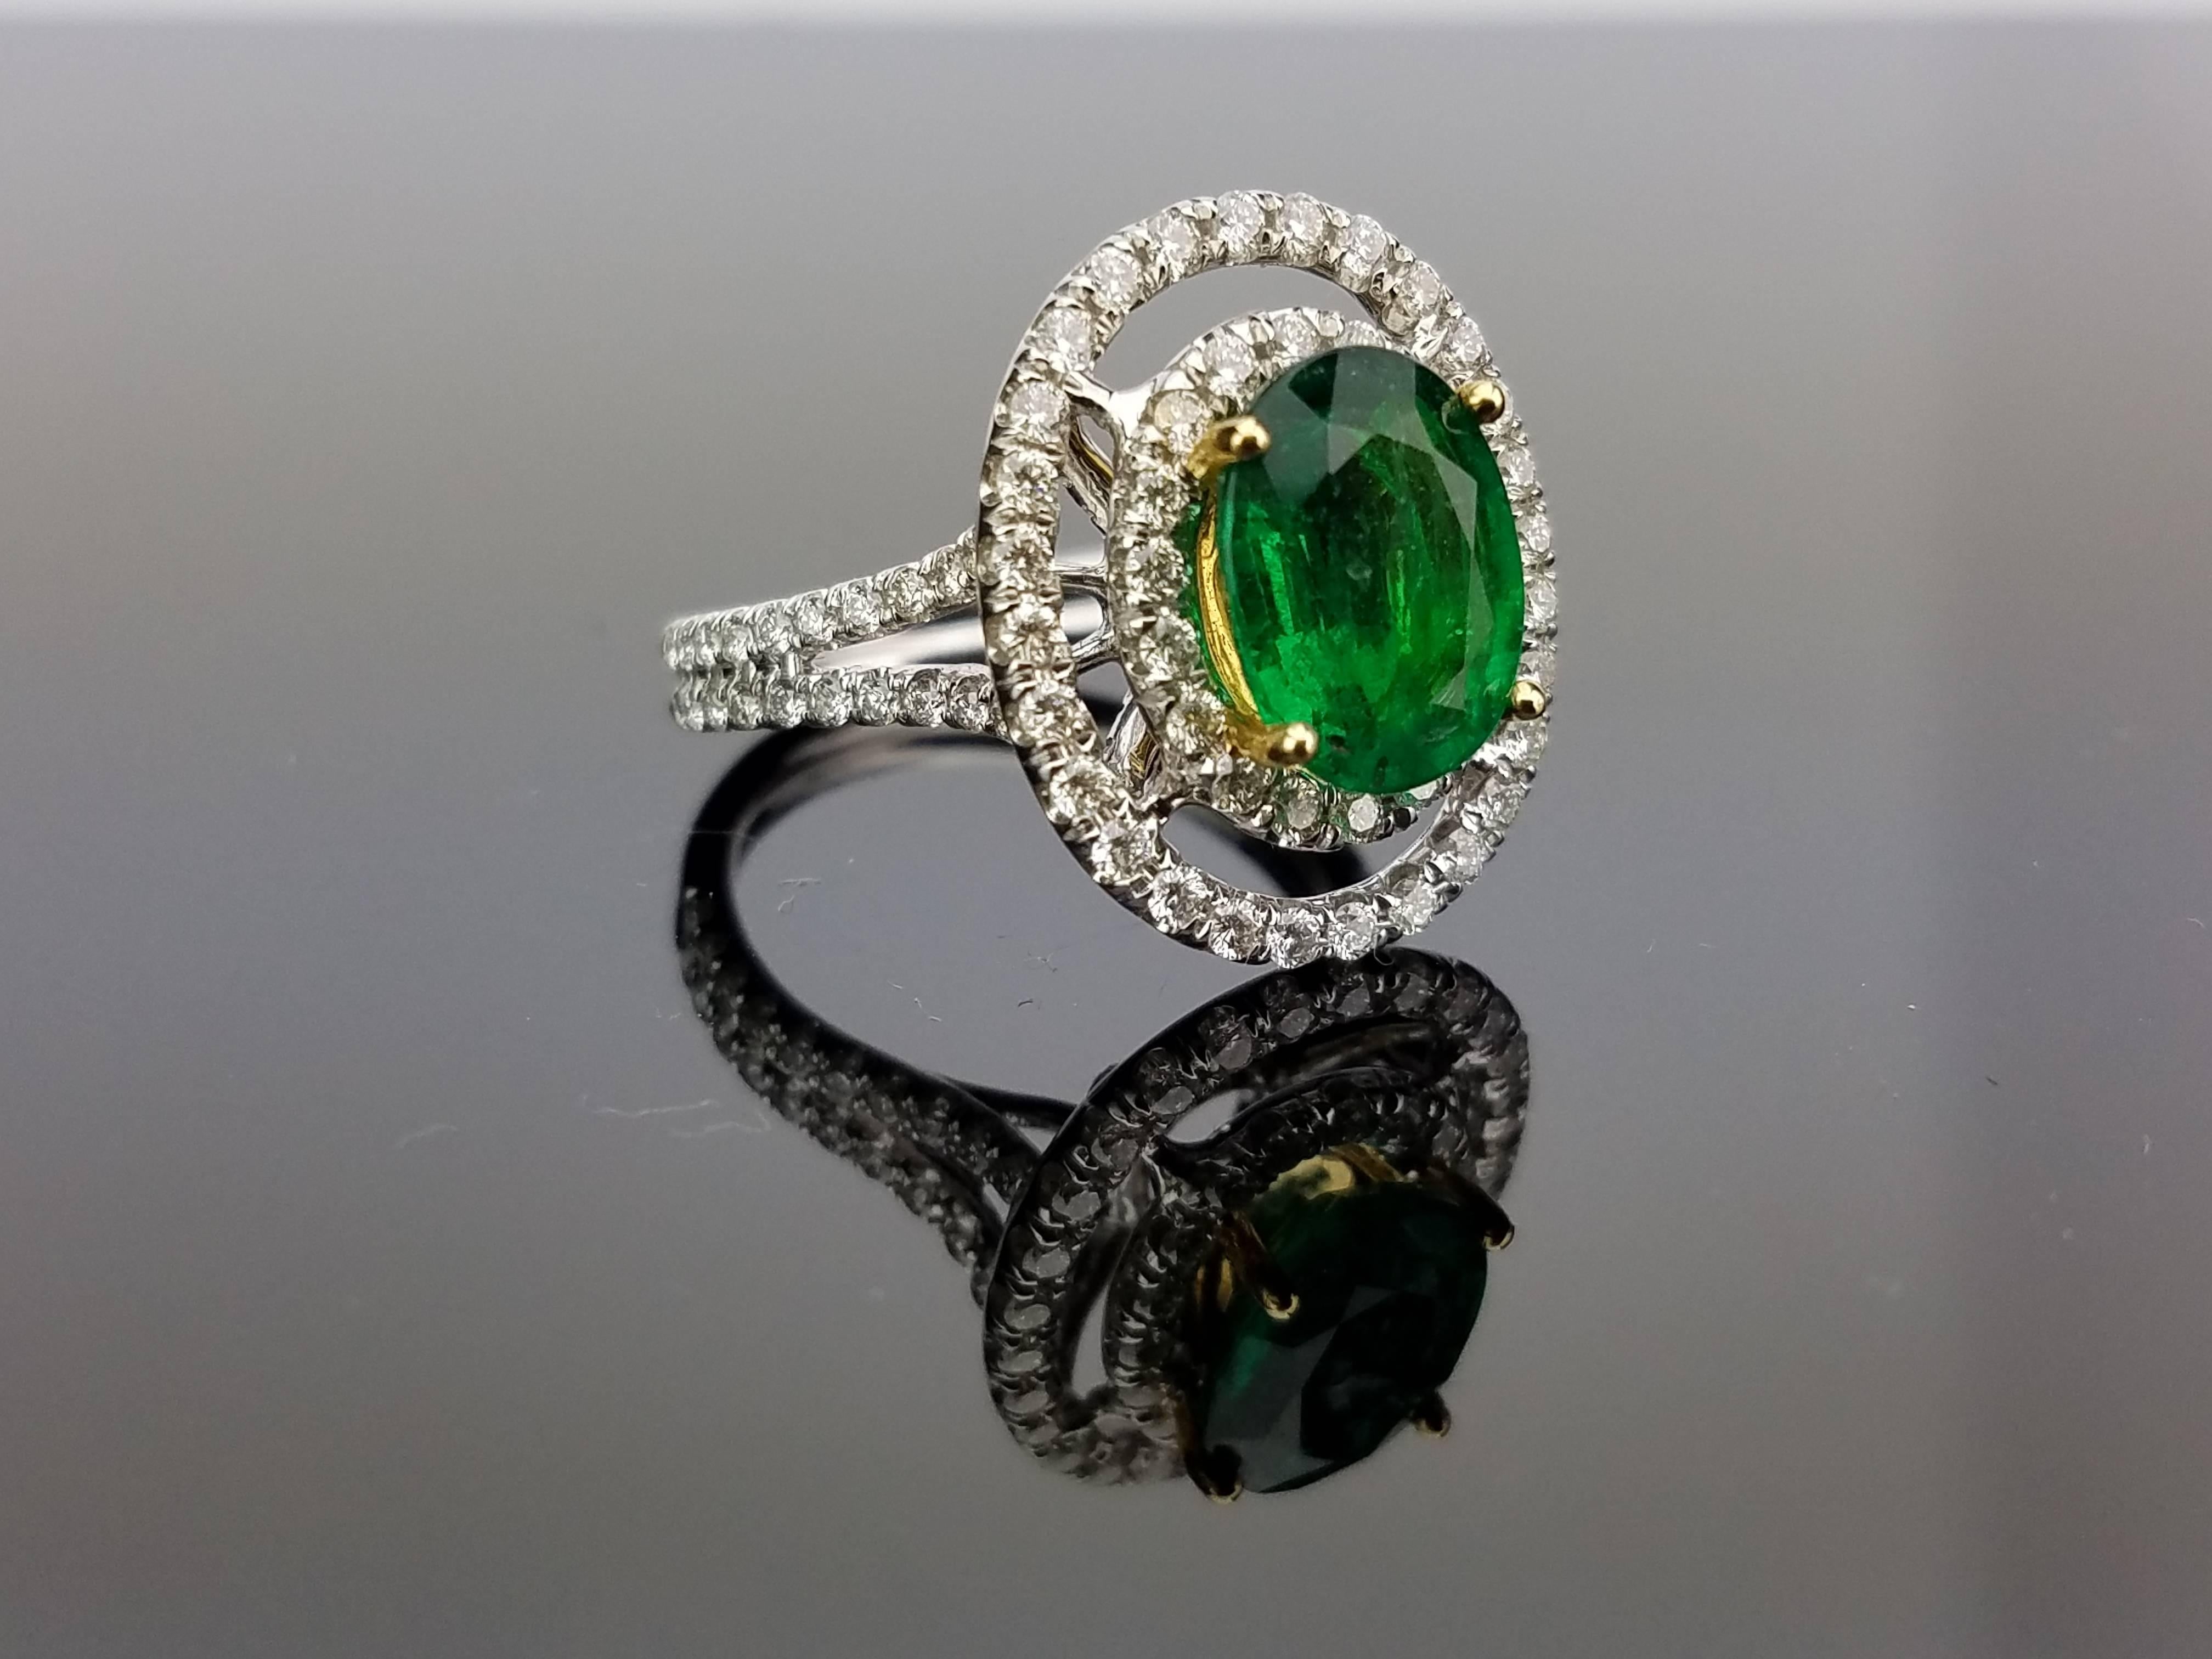 Oval Zambian Emerald Ring with pavé set Diamond on 18K White Gold hoop

Center Stone Details: 
Stone: Emerald
Cut: Oval
Weight: 2.17 carat 

Diamond Details: 
Cut: Brilliant (round)
Total Carat Weight: 0.96 carat 
Quality: VS/SI , H/I 

18K Gold: